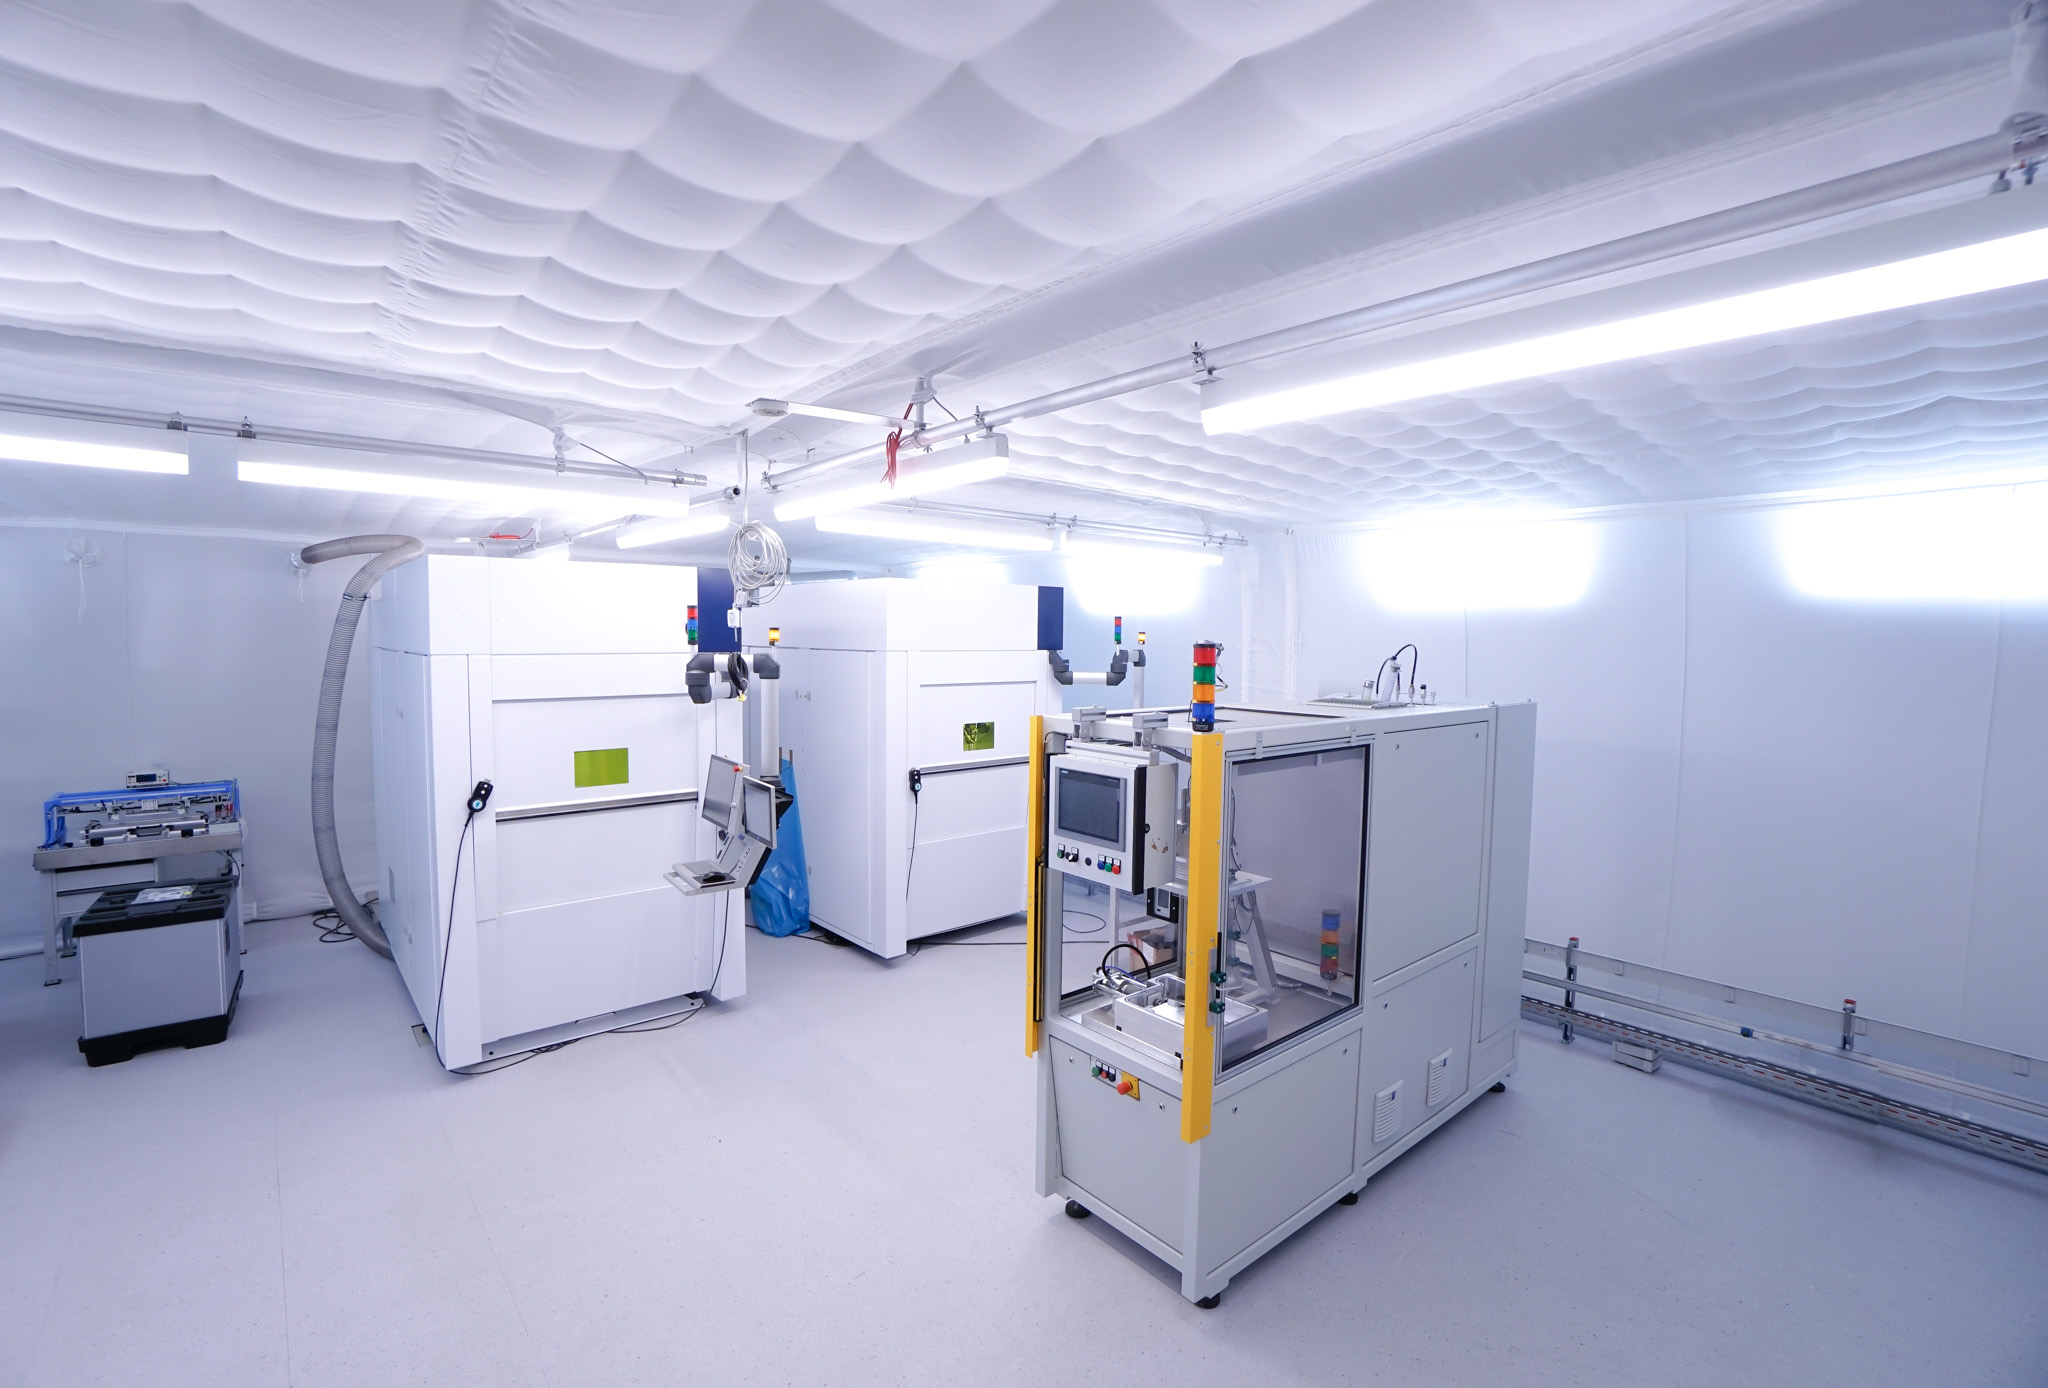 Inside the dry cleanroom system DryClean-CAPE®